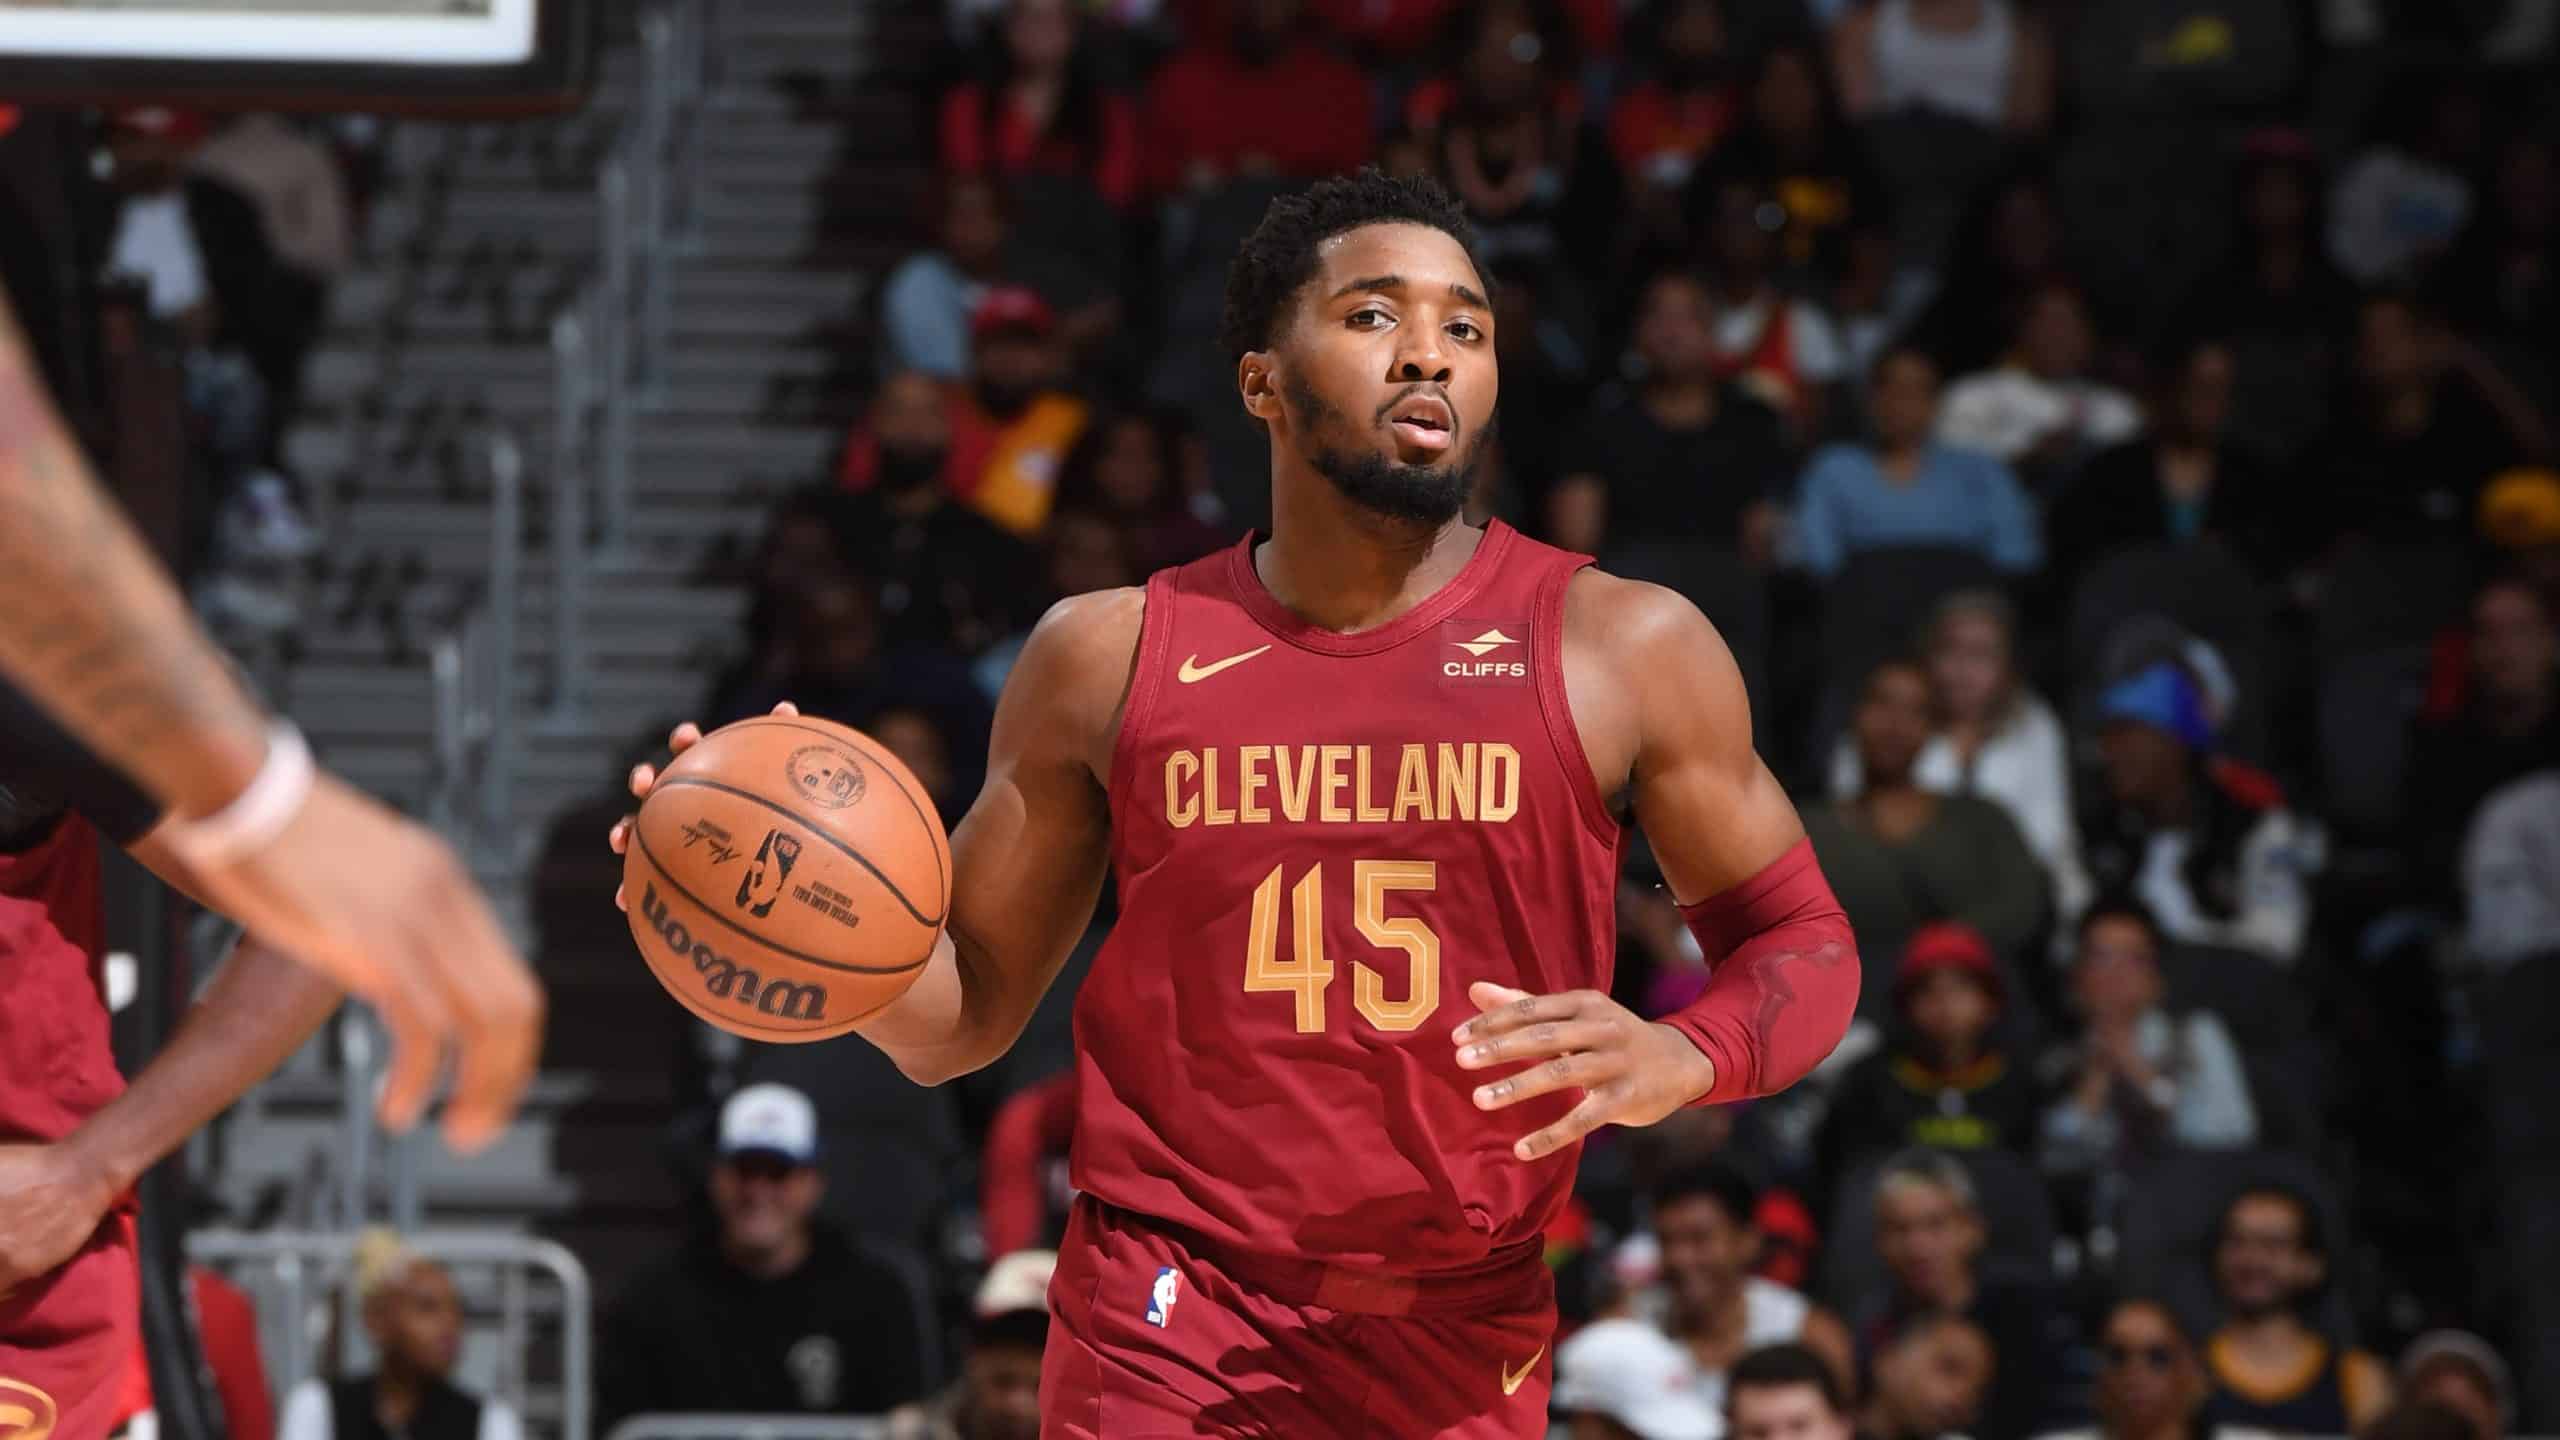  Donovan Mitchell's Patience Tested: Inside the Cavaliers' Playoff Turmoil and Future Prospects